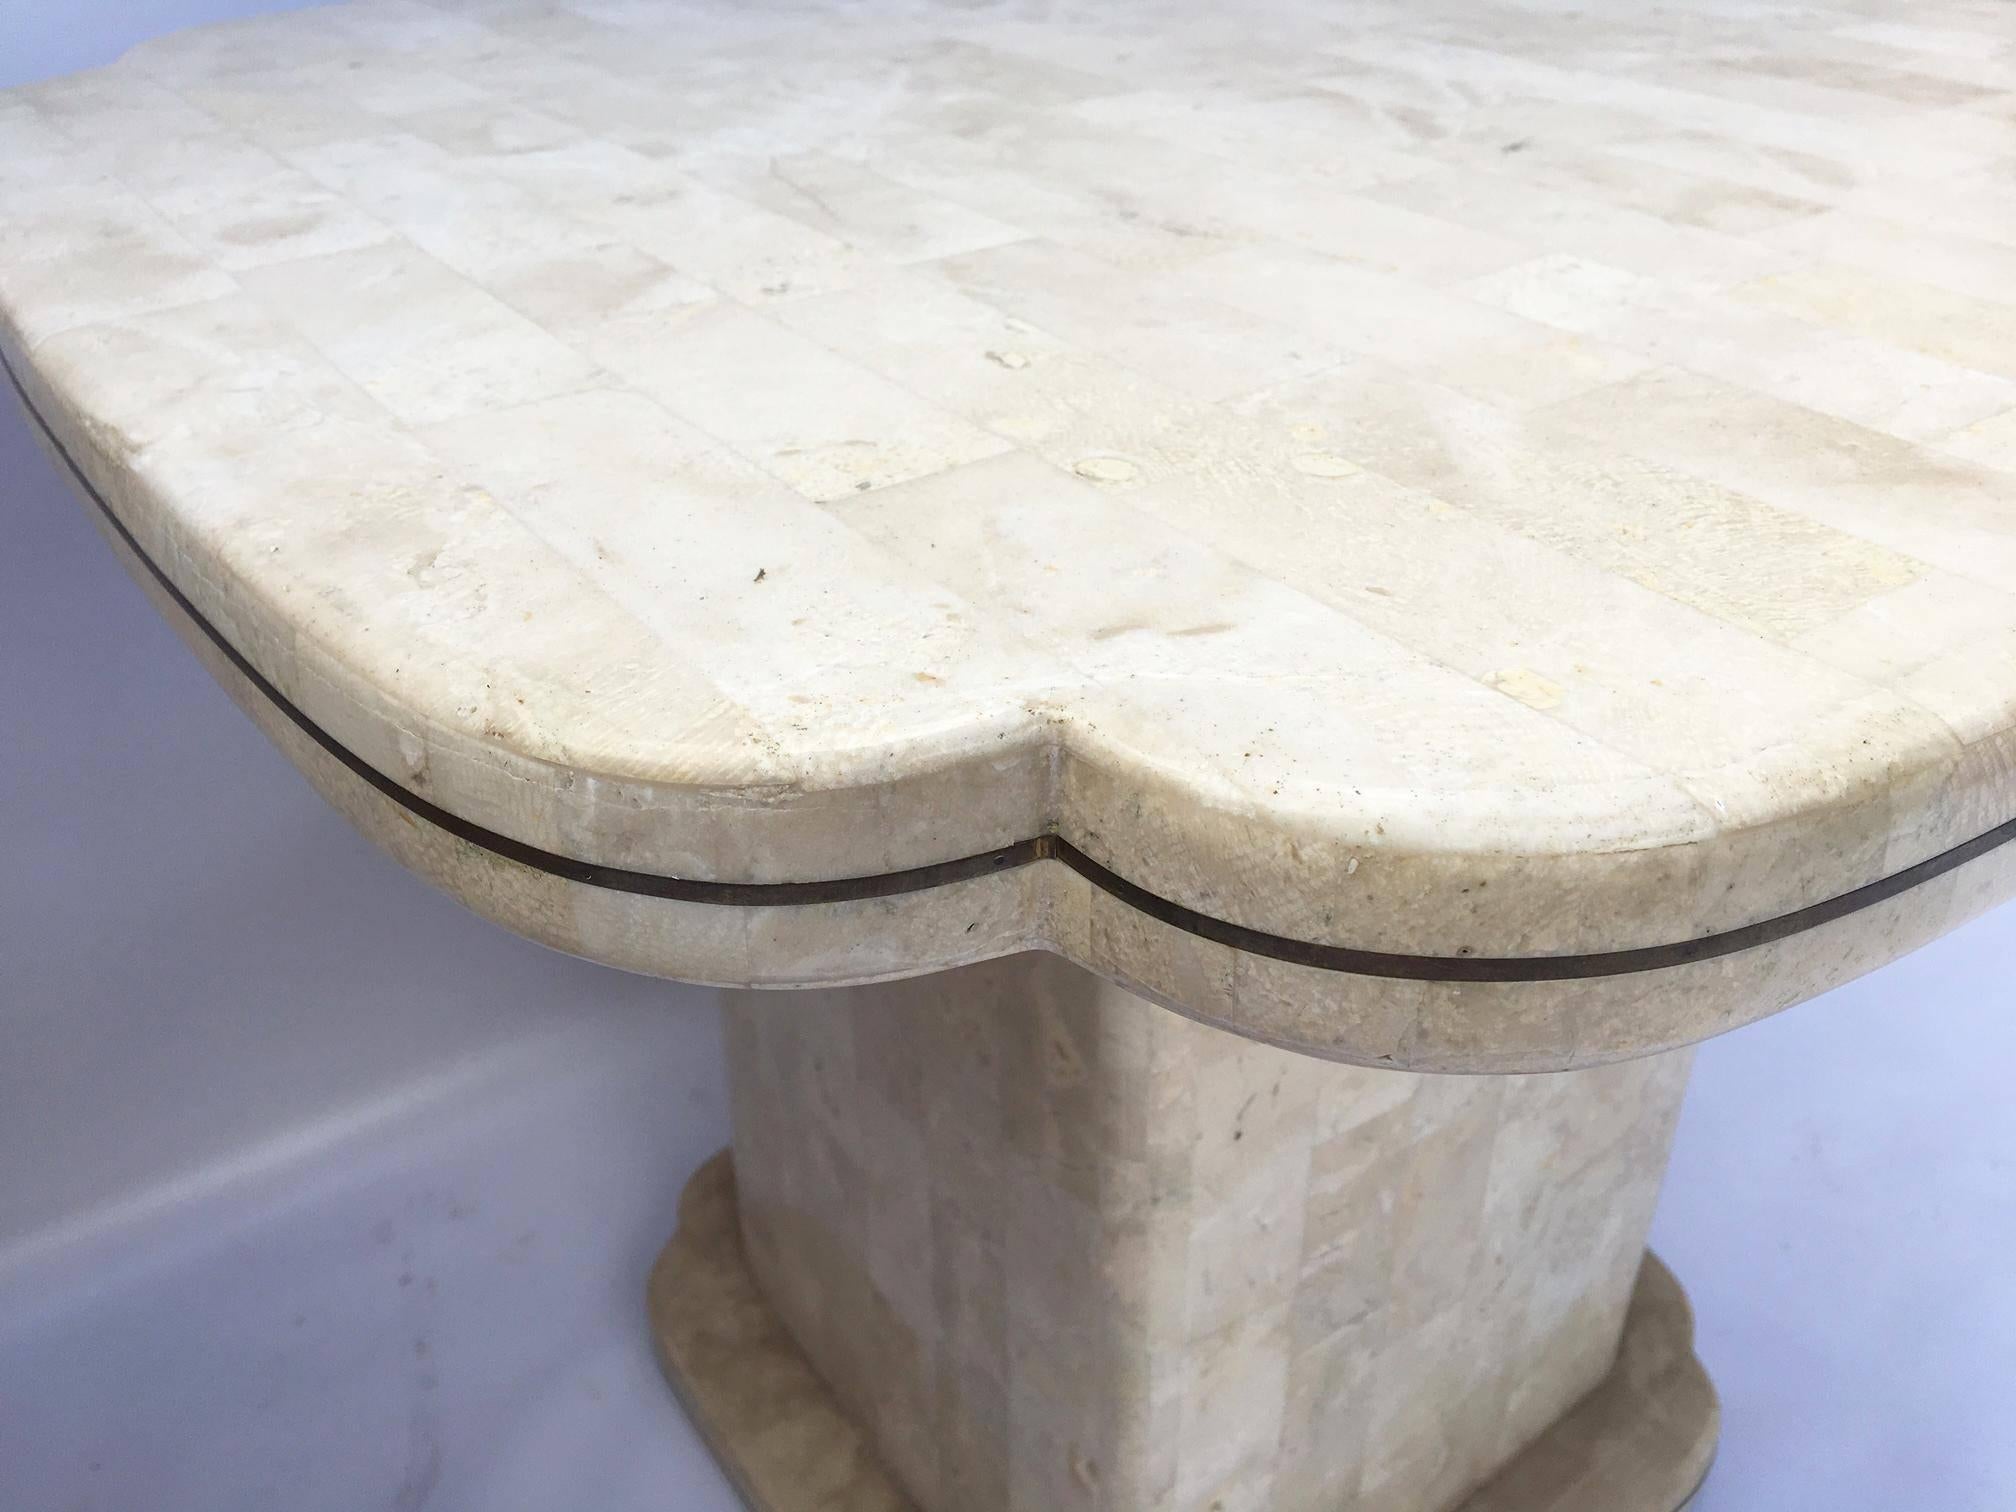 Pair of Maitland-Smith end tables feature a fossil stone veneer and brass inlay. Excellent condition other than small area of missing stone on rear of each table.
As always, all reasonable offers will be considered.